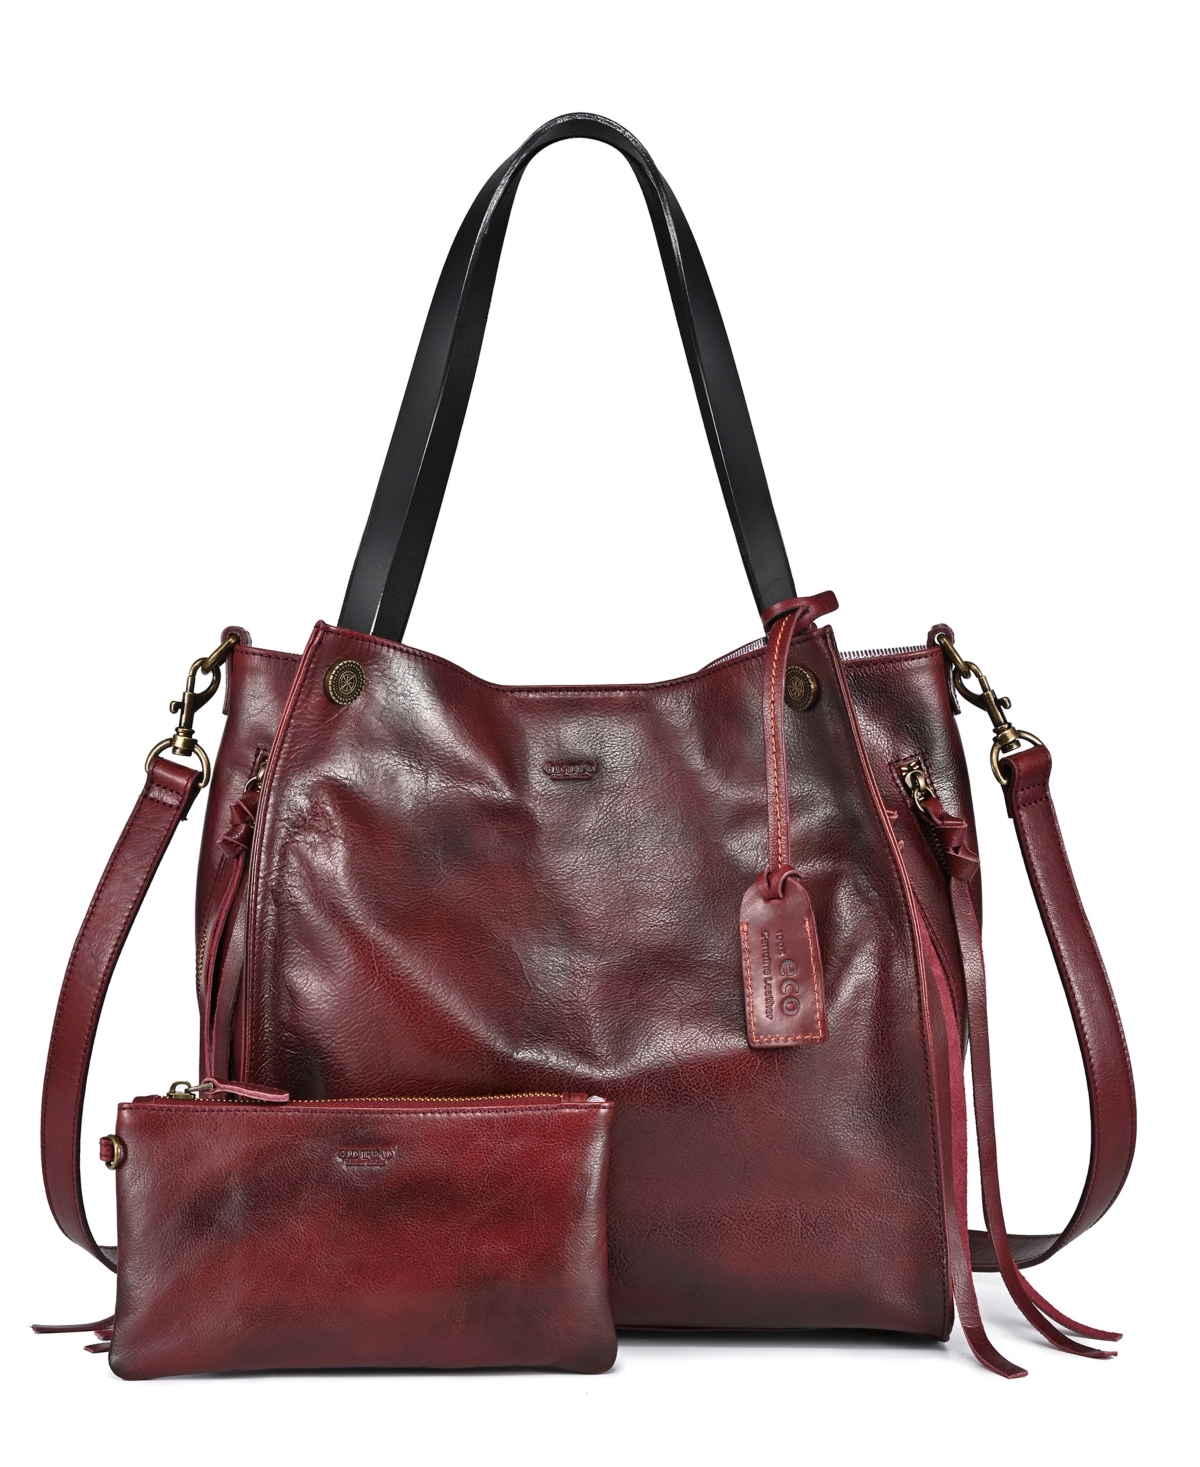 Women's Genuine Leather Daisy Tote Bag - Taupe